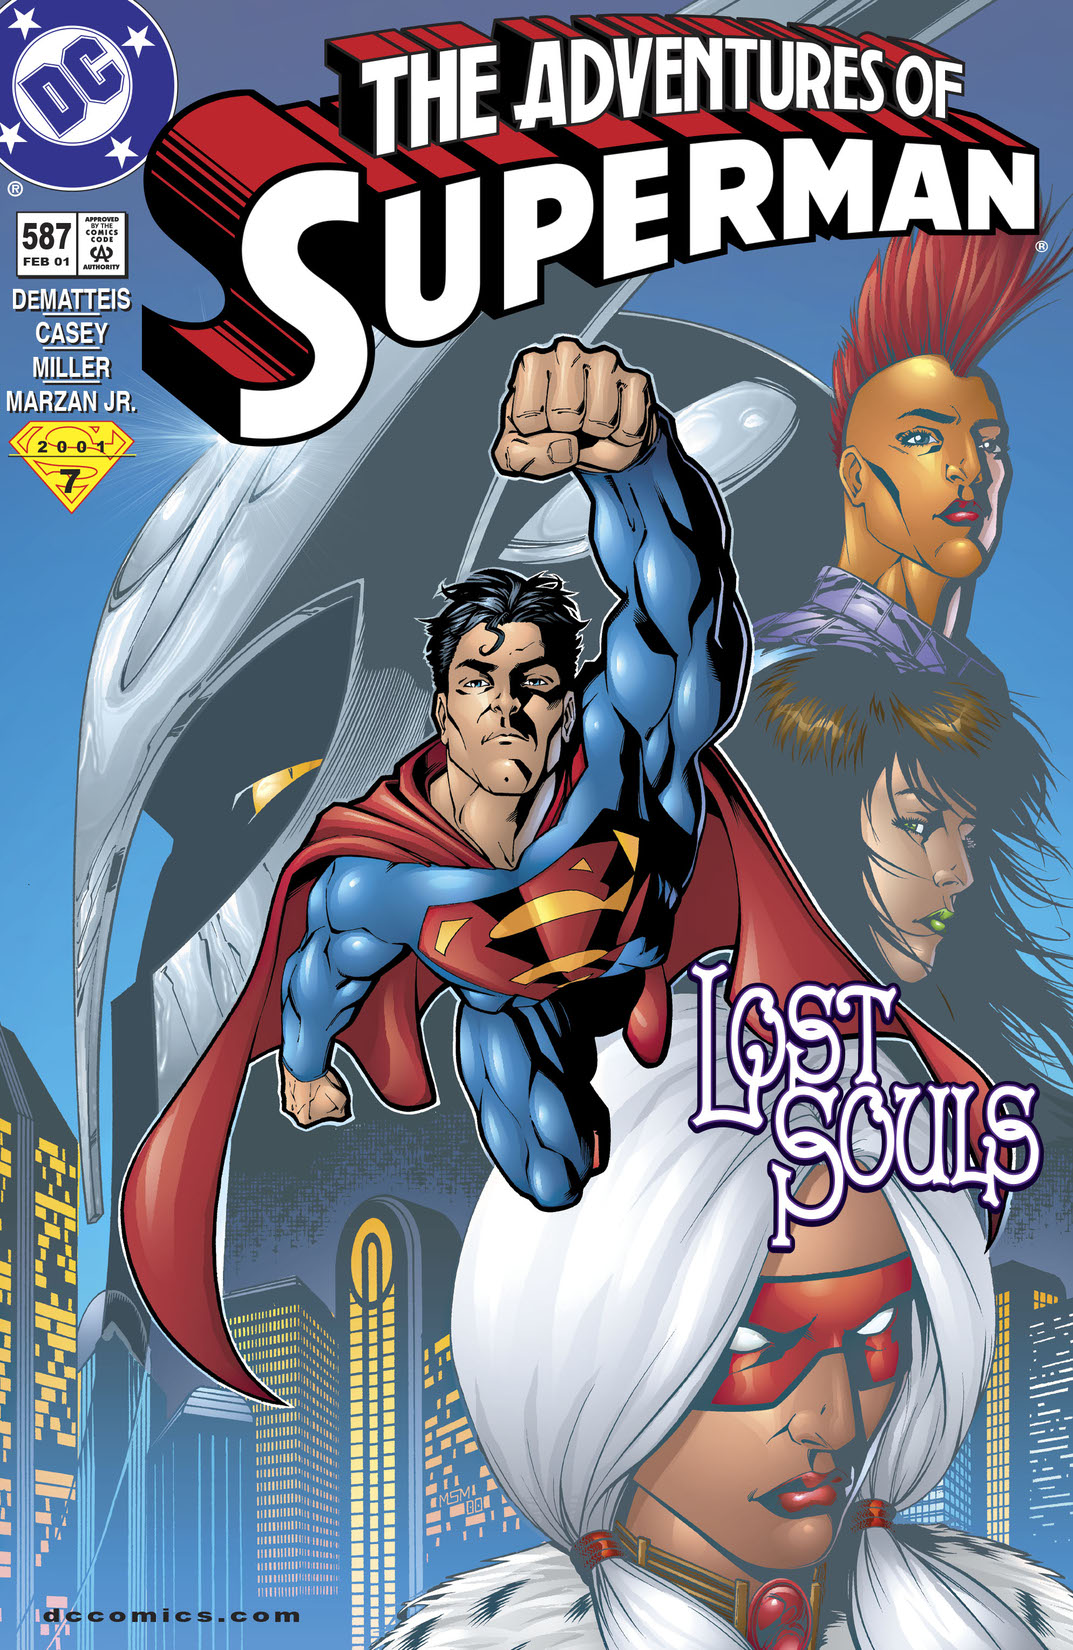 Adventures of Superman (1987-2006) #587 preview images